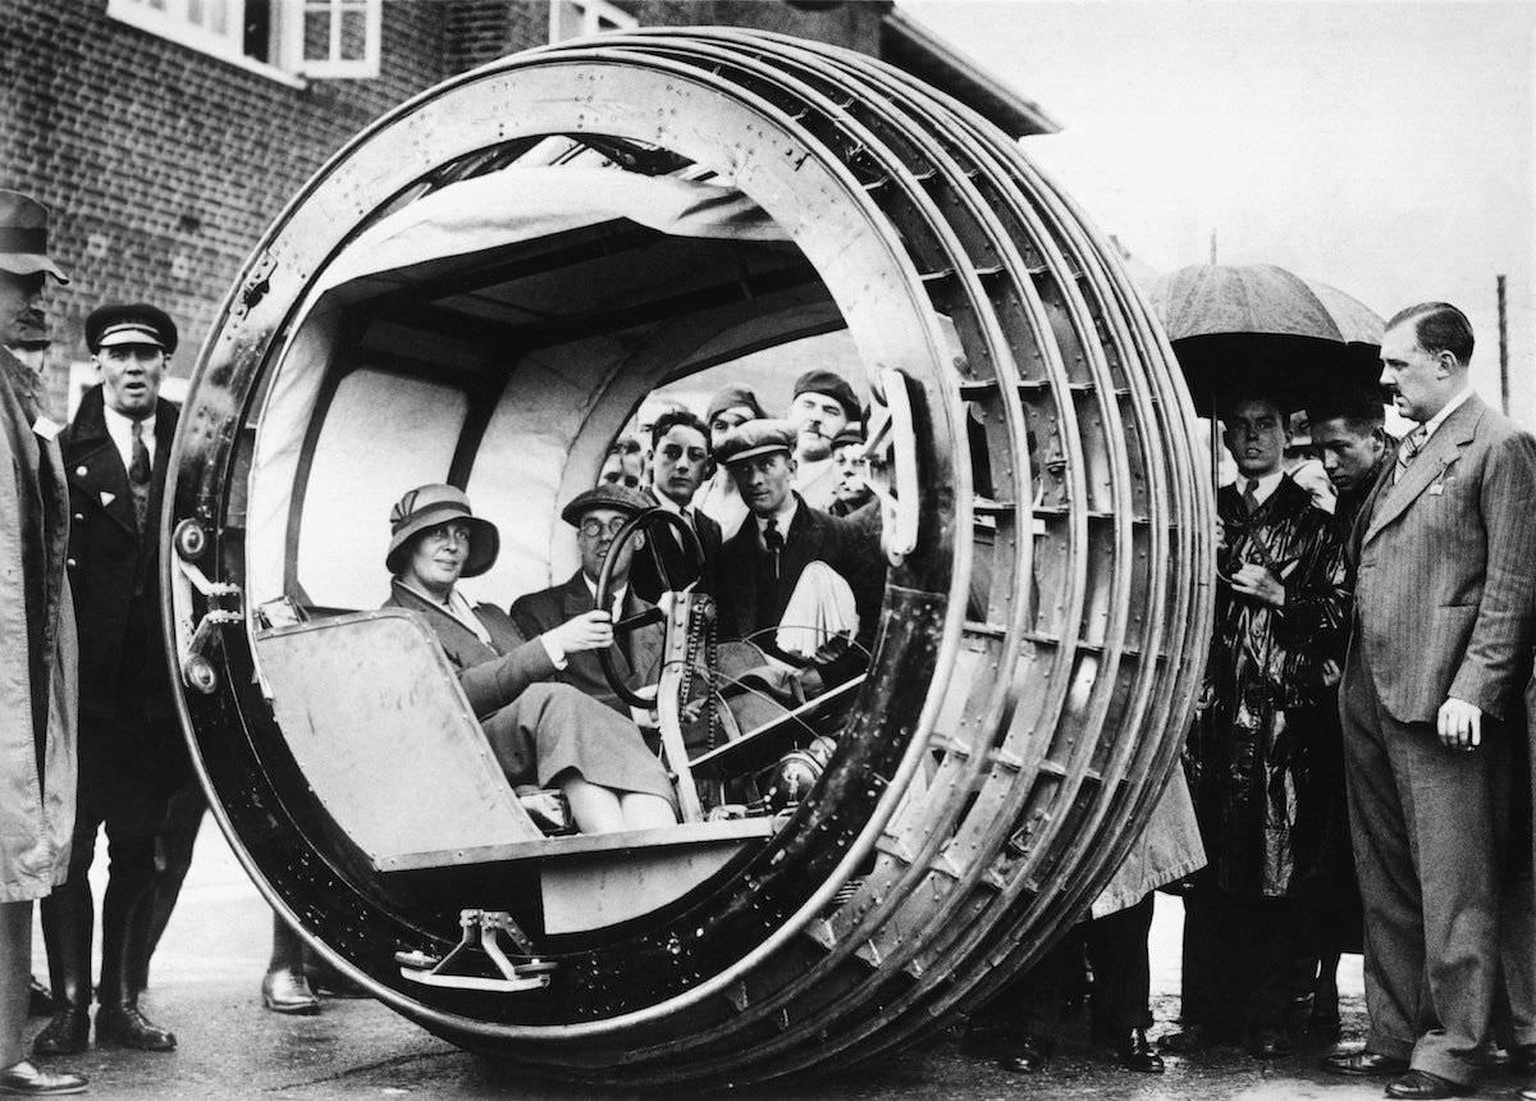 https://mbtimetraveler.com/tag/monowheel/ A monowheel, also known as the Dynasphere spherical car, in the UK in 1930.